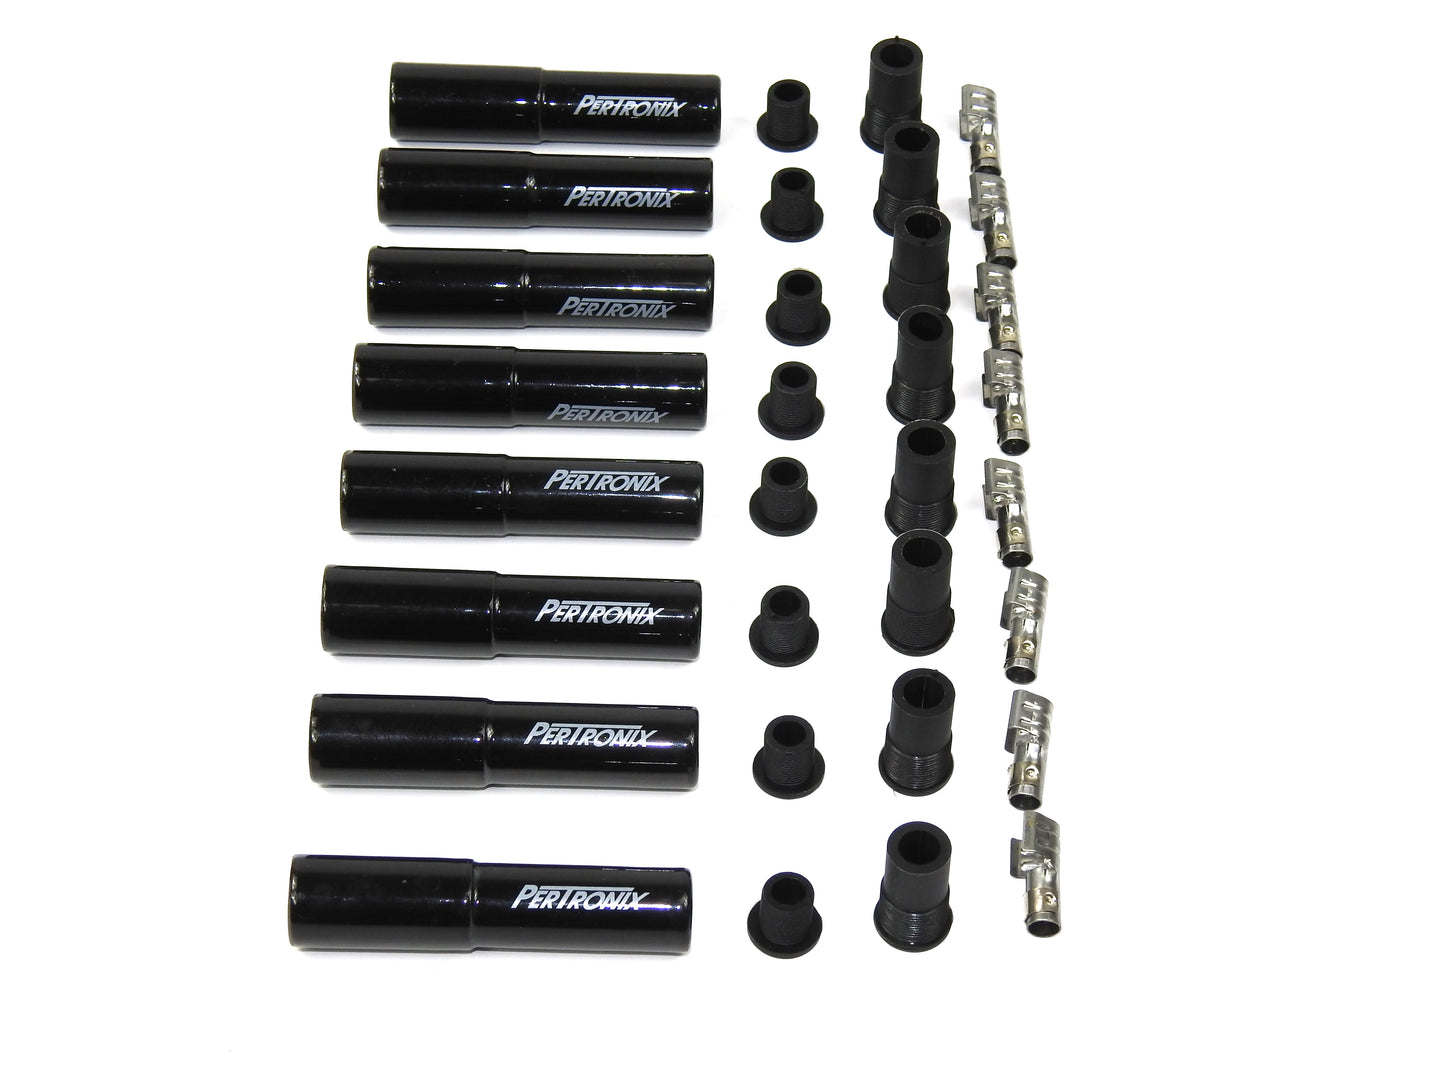 PerTronix 8562HT-8 Black Ceramic Spark Plug Boot Straight Set of 8 includes silicone plug and wire bushings, stainless steel spark plug terminals and high temp ceramic boots